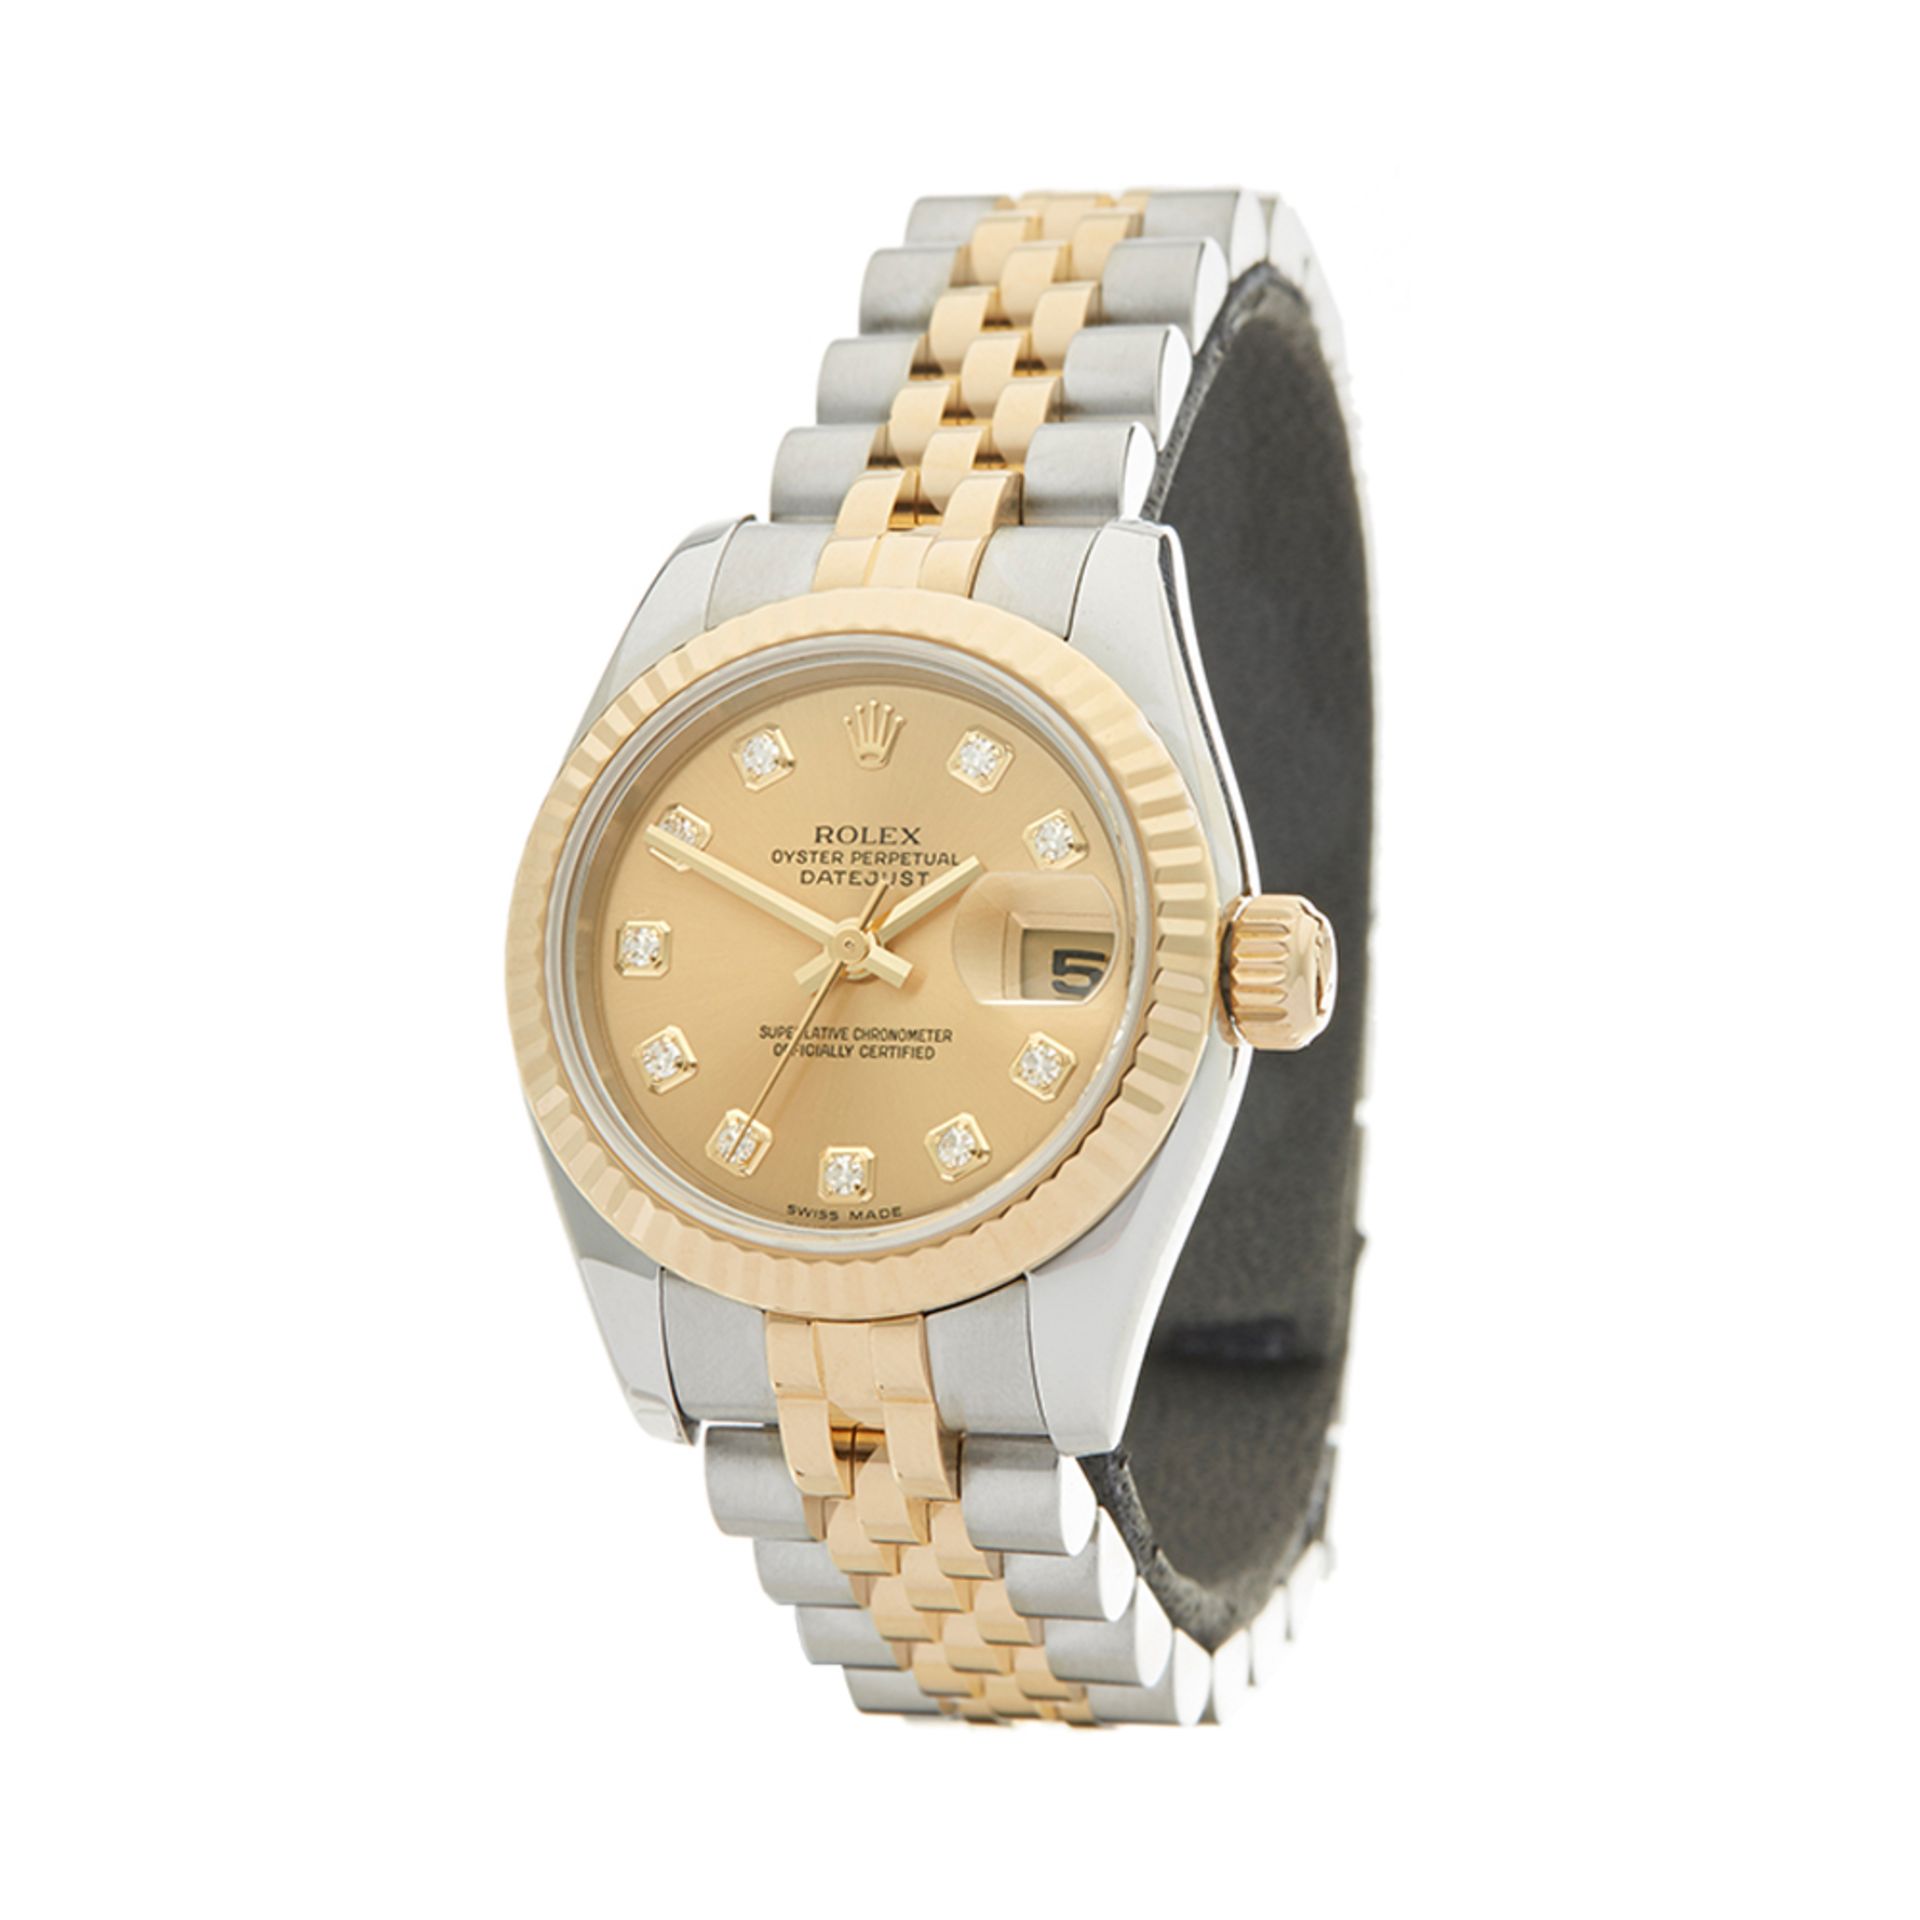 Datejust 26mm Stainless Steel & 18K Yellow Gold - 179173 - Image 3 of 8